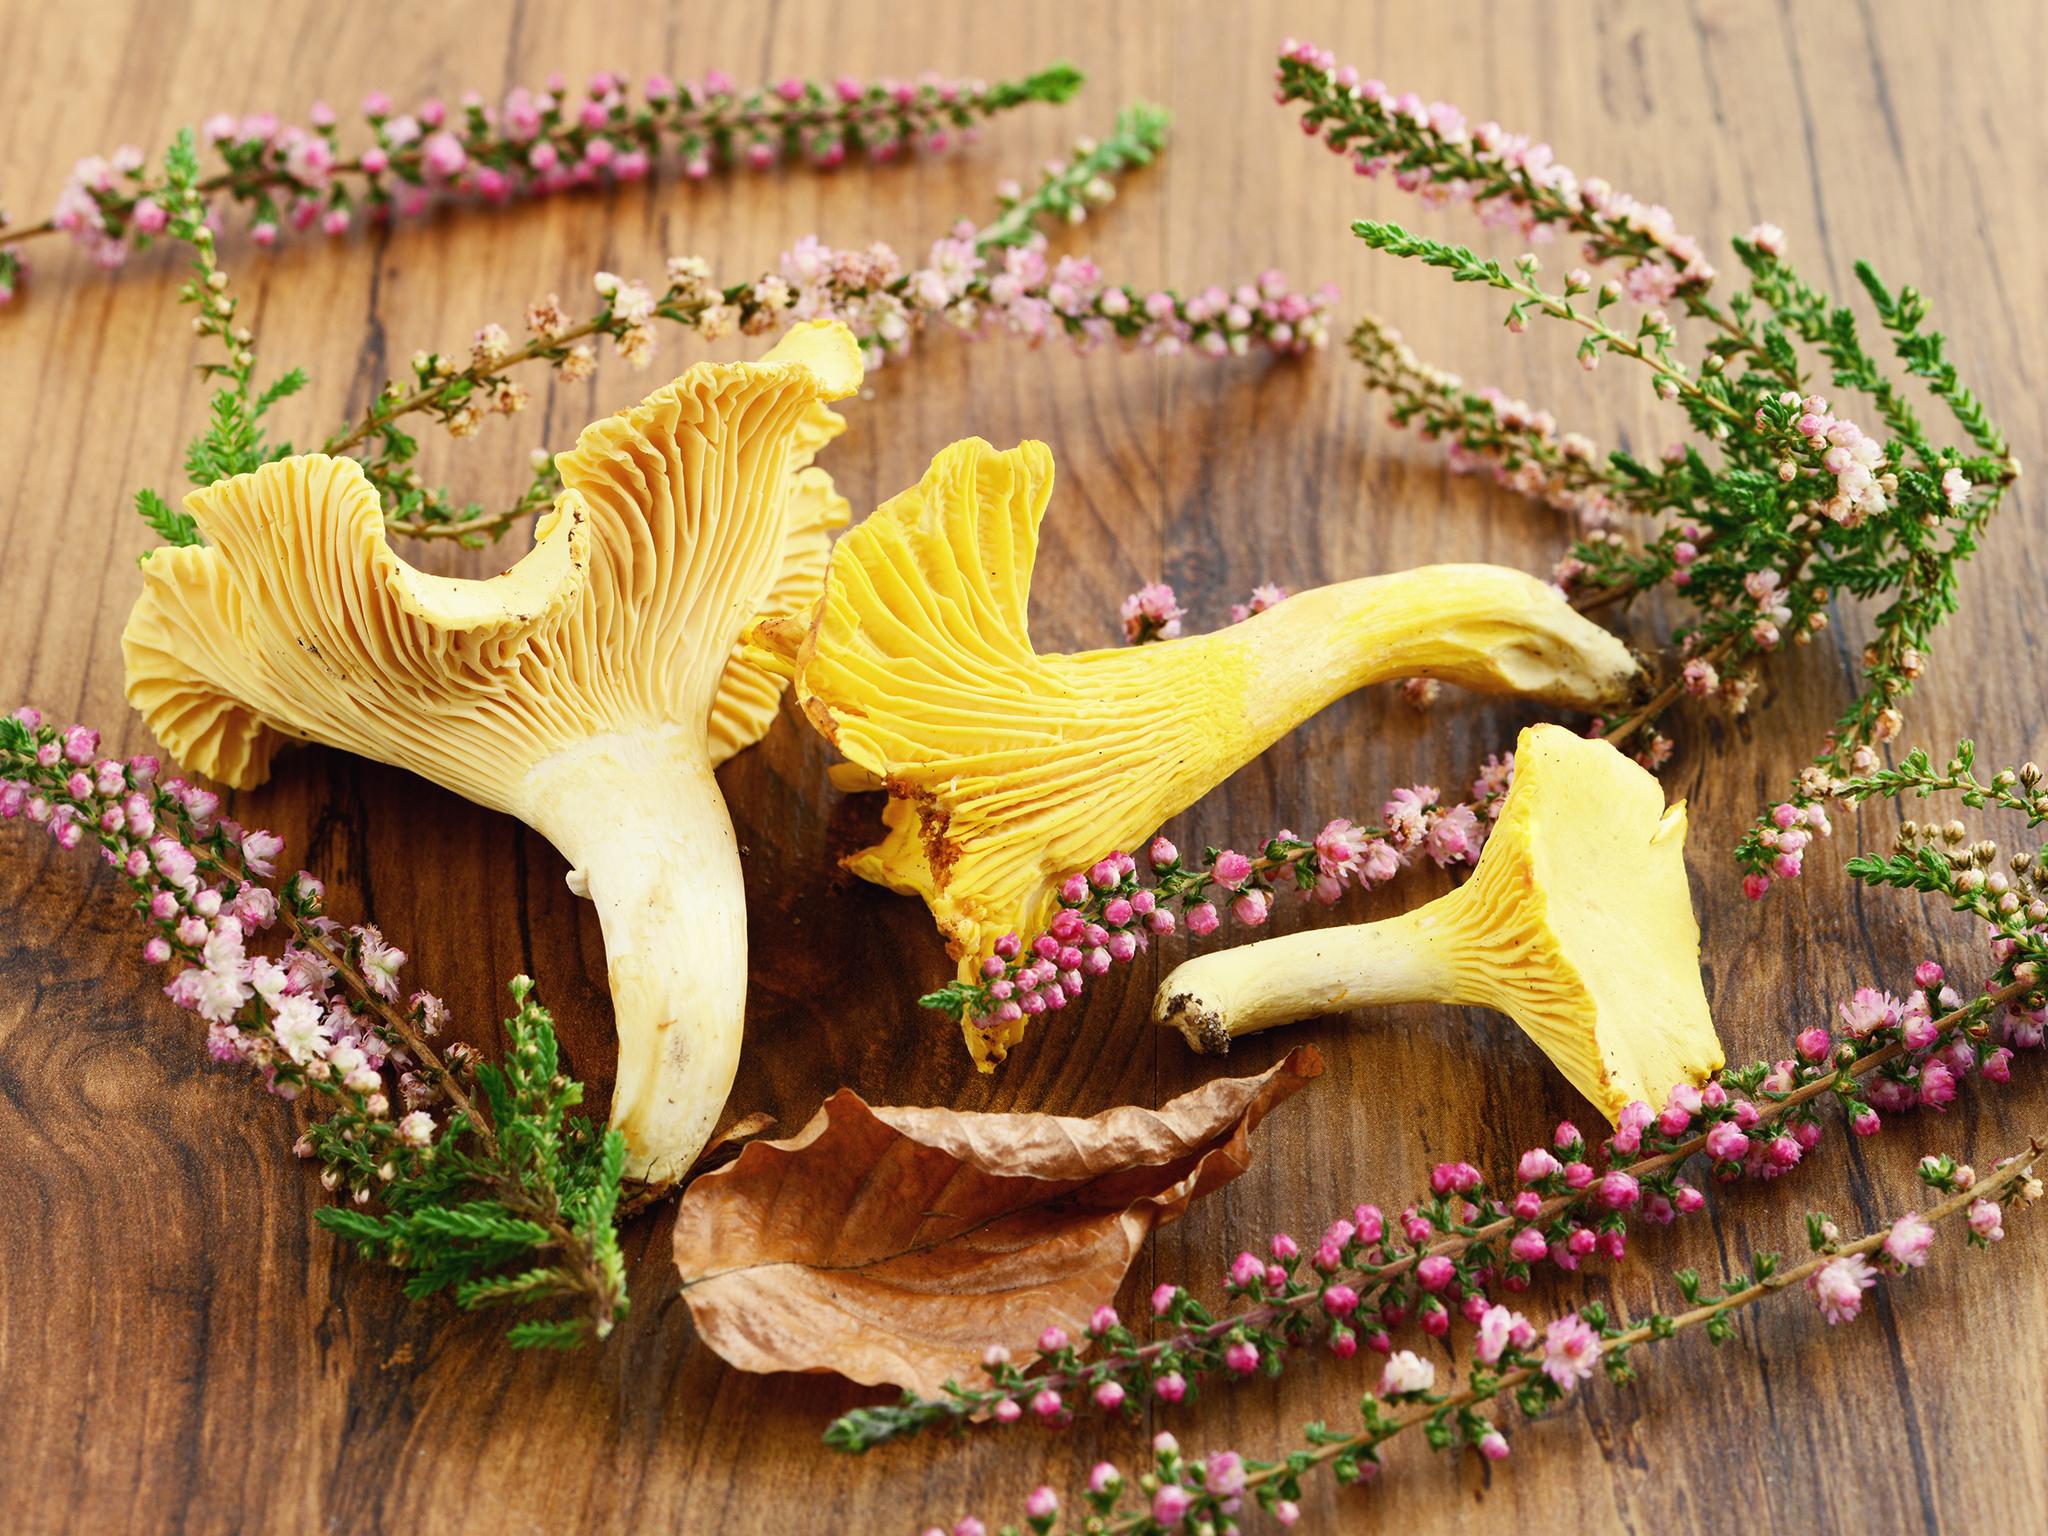 Foraged beers can contain anything from honey to mushrooms